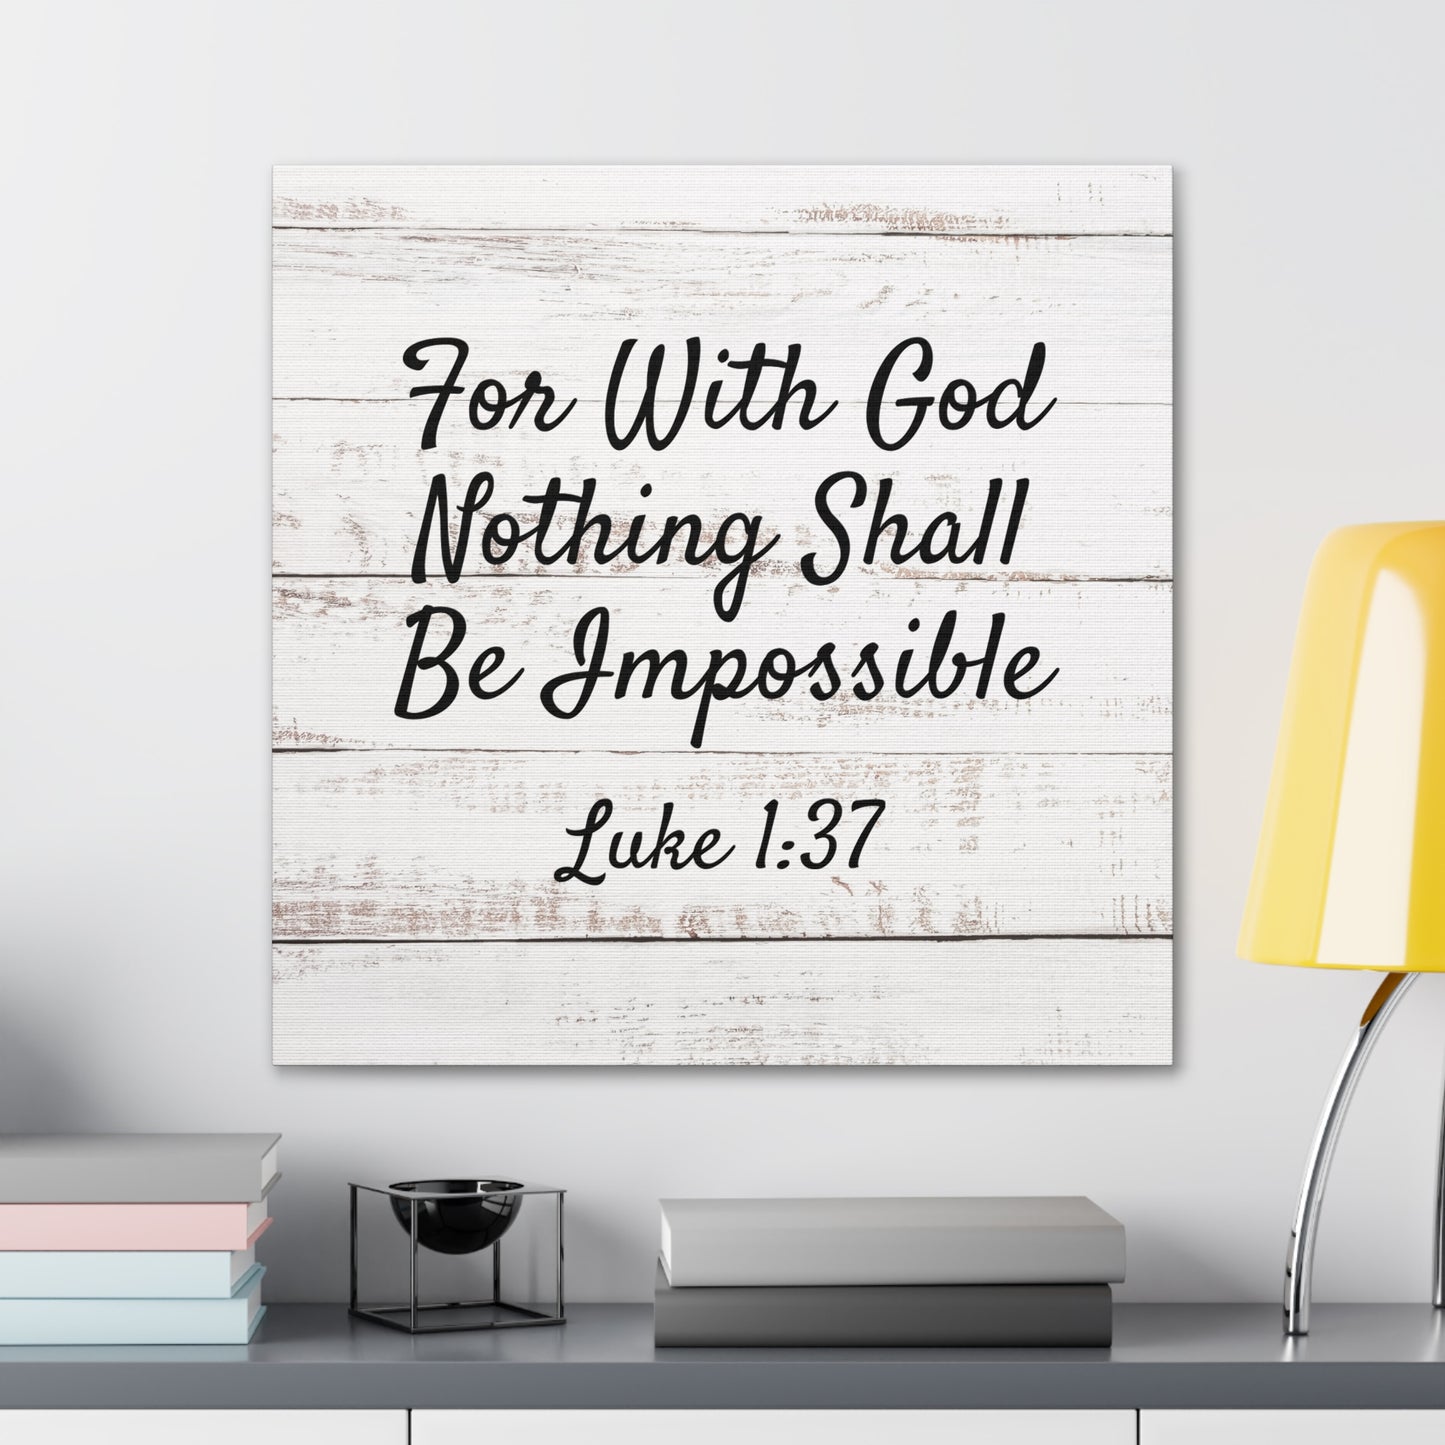 "For With God, Nothing Shall Be Impossible" Wall Art - Weave Got Gifts - Unique Gifts You Won’t Find Anywhere Else!